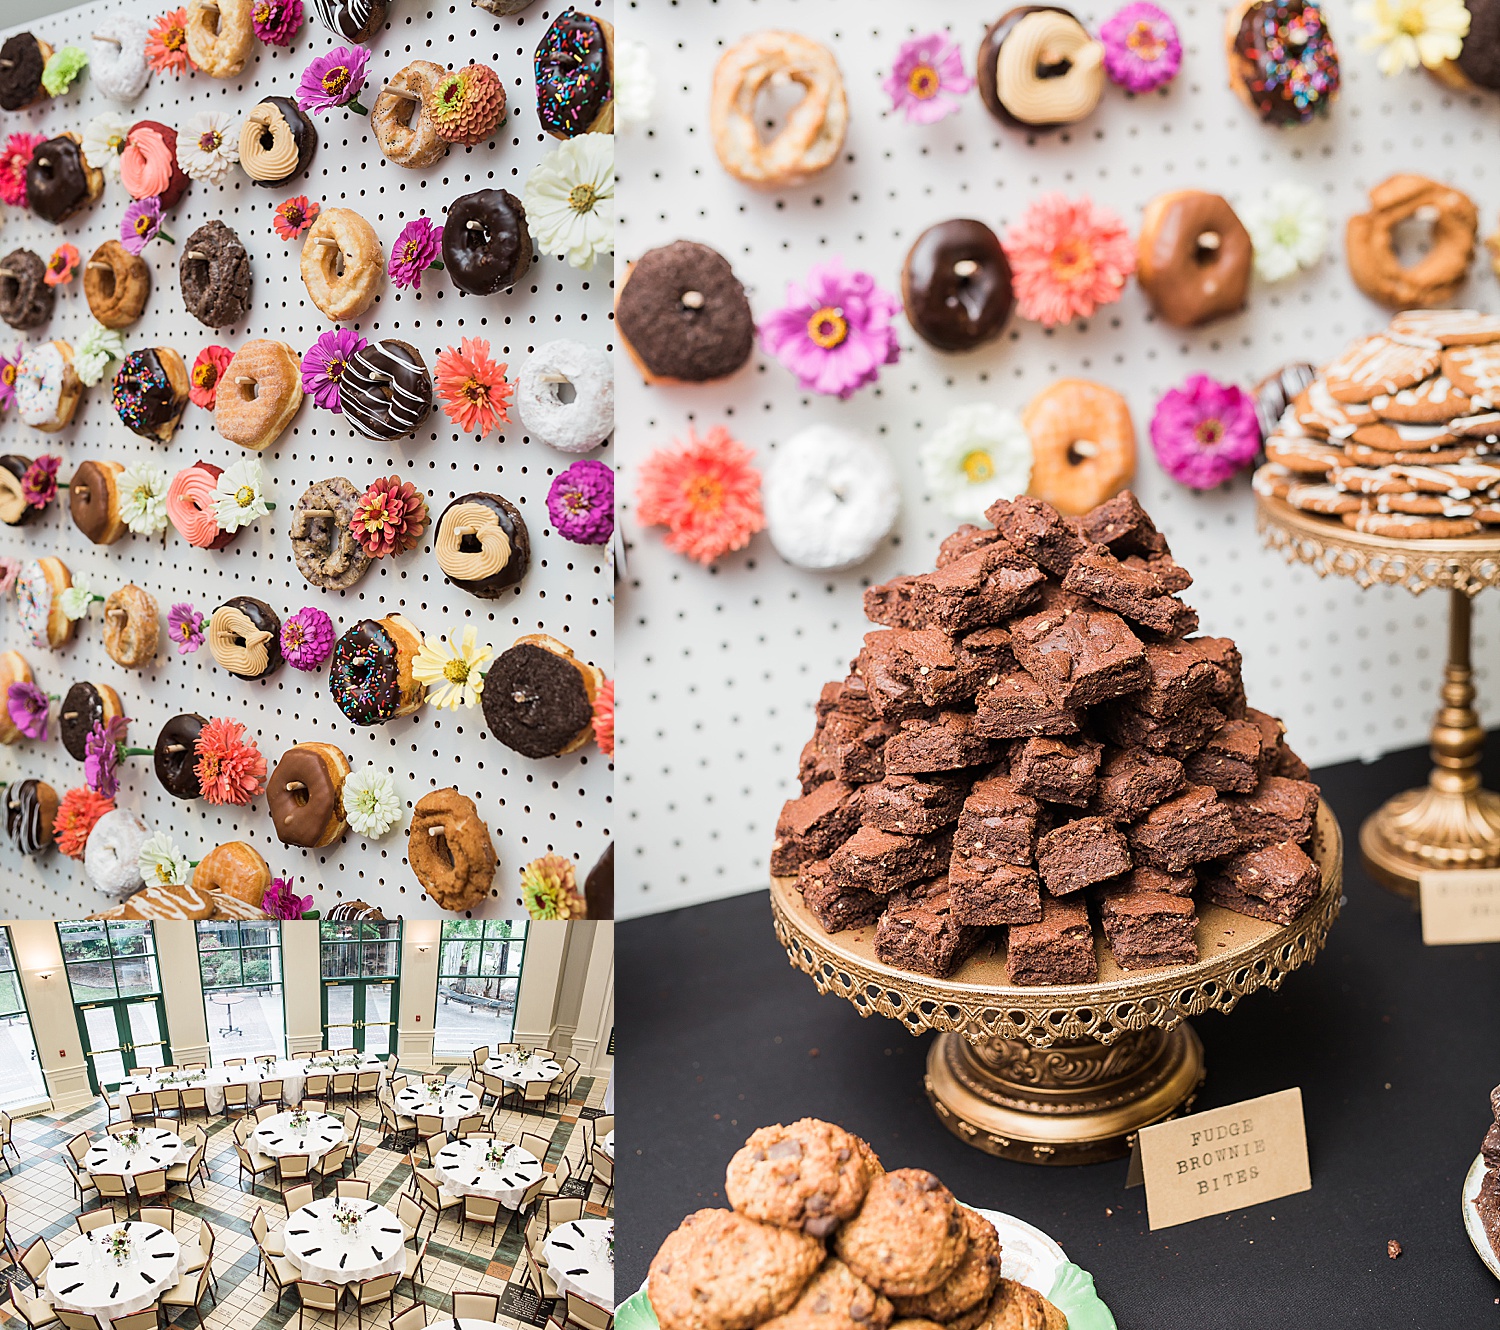 donut wall and dessert table at reception hall space in Minnesota on wedding day 